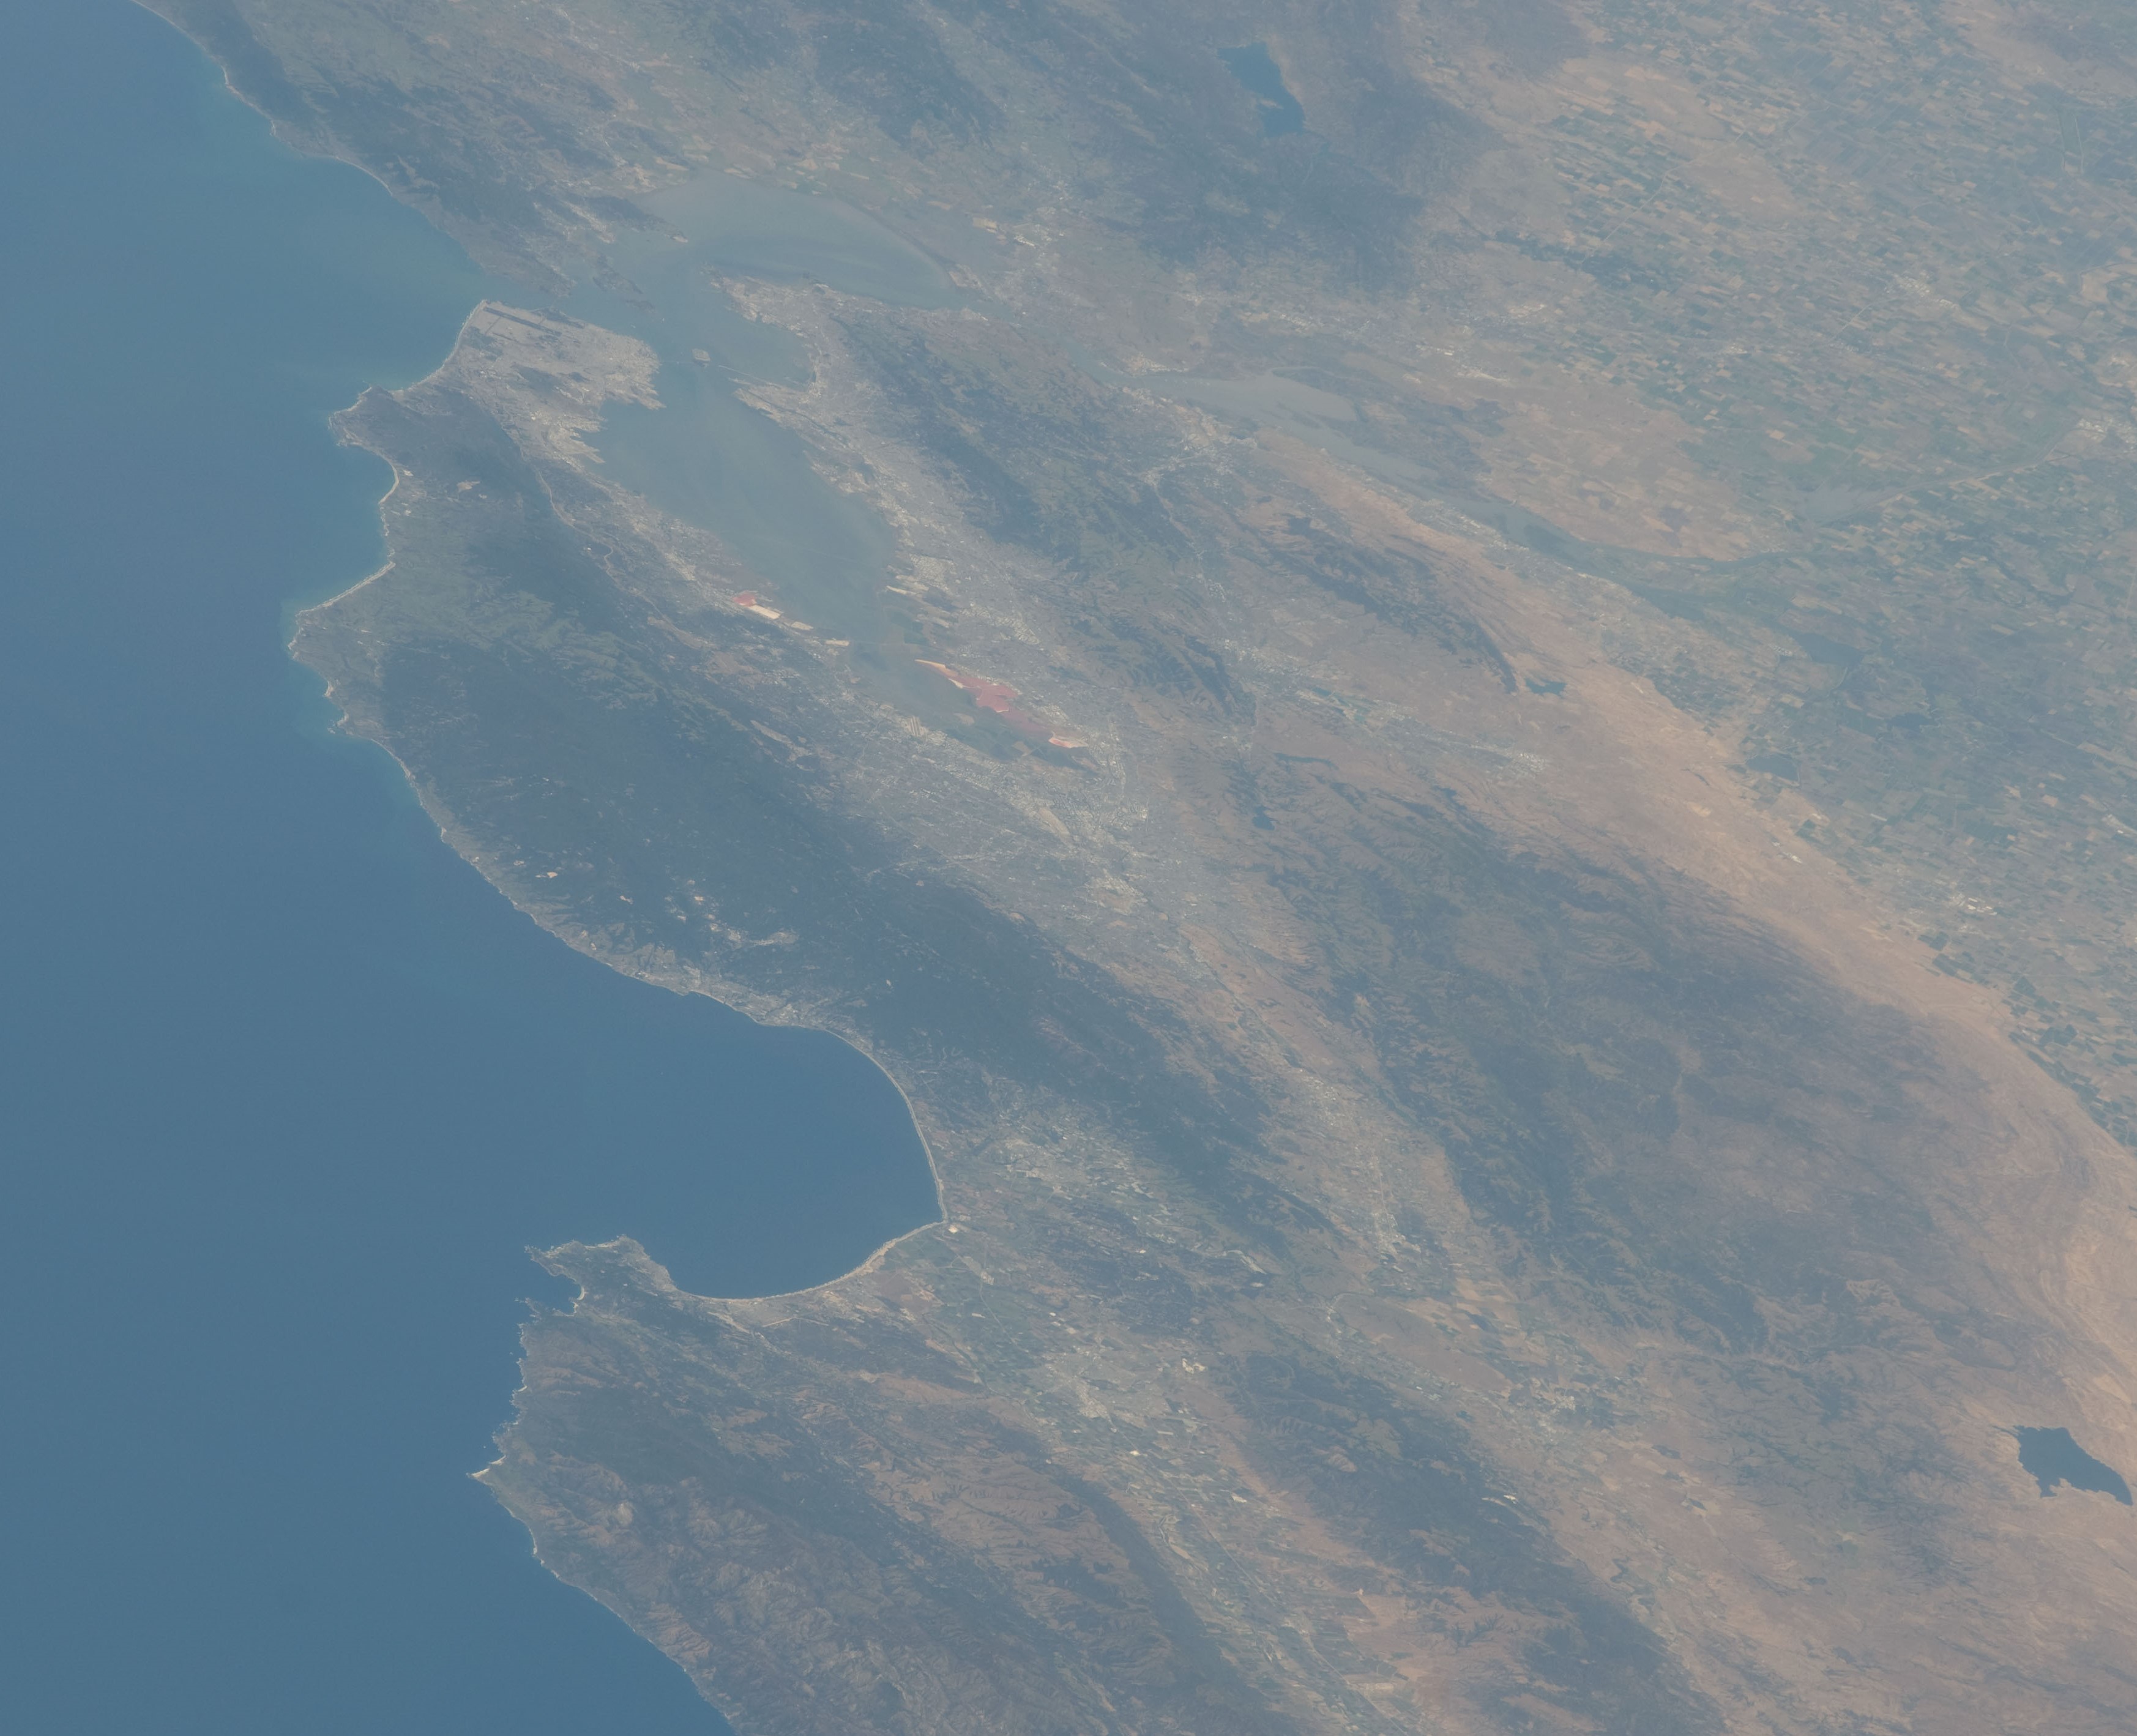 The San Francisco and Monterey area in California